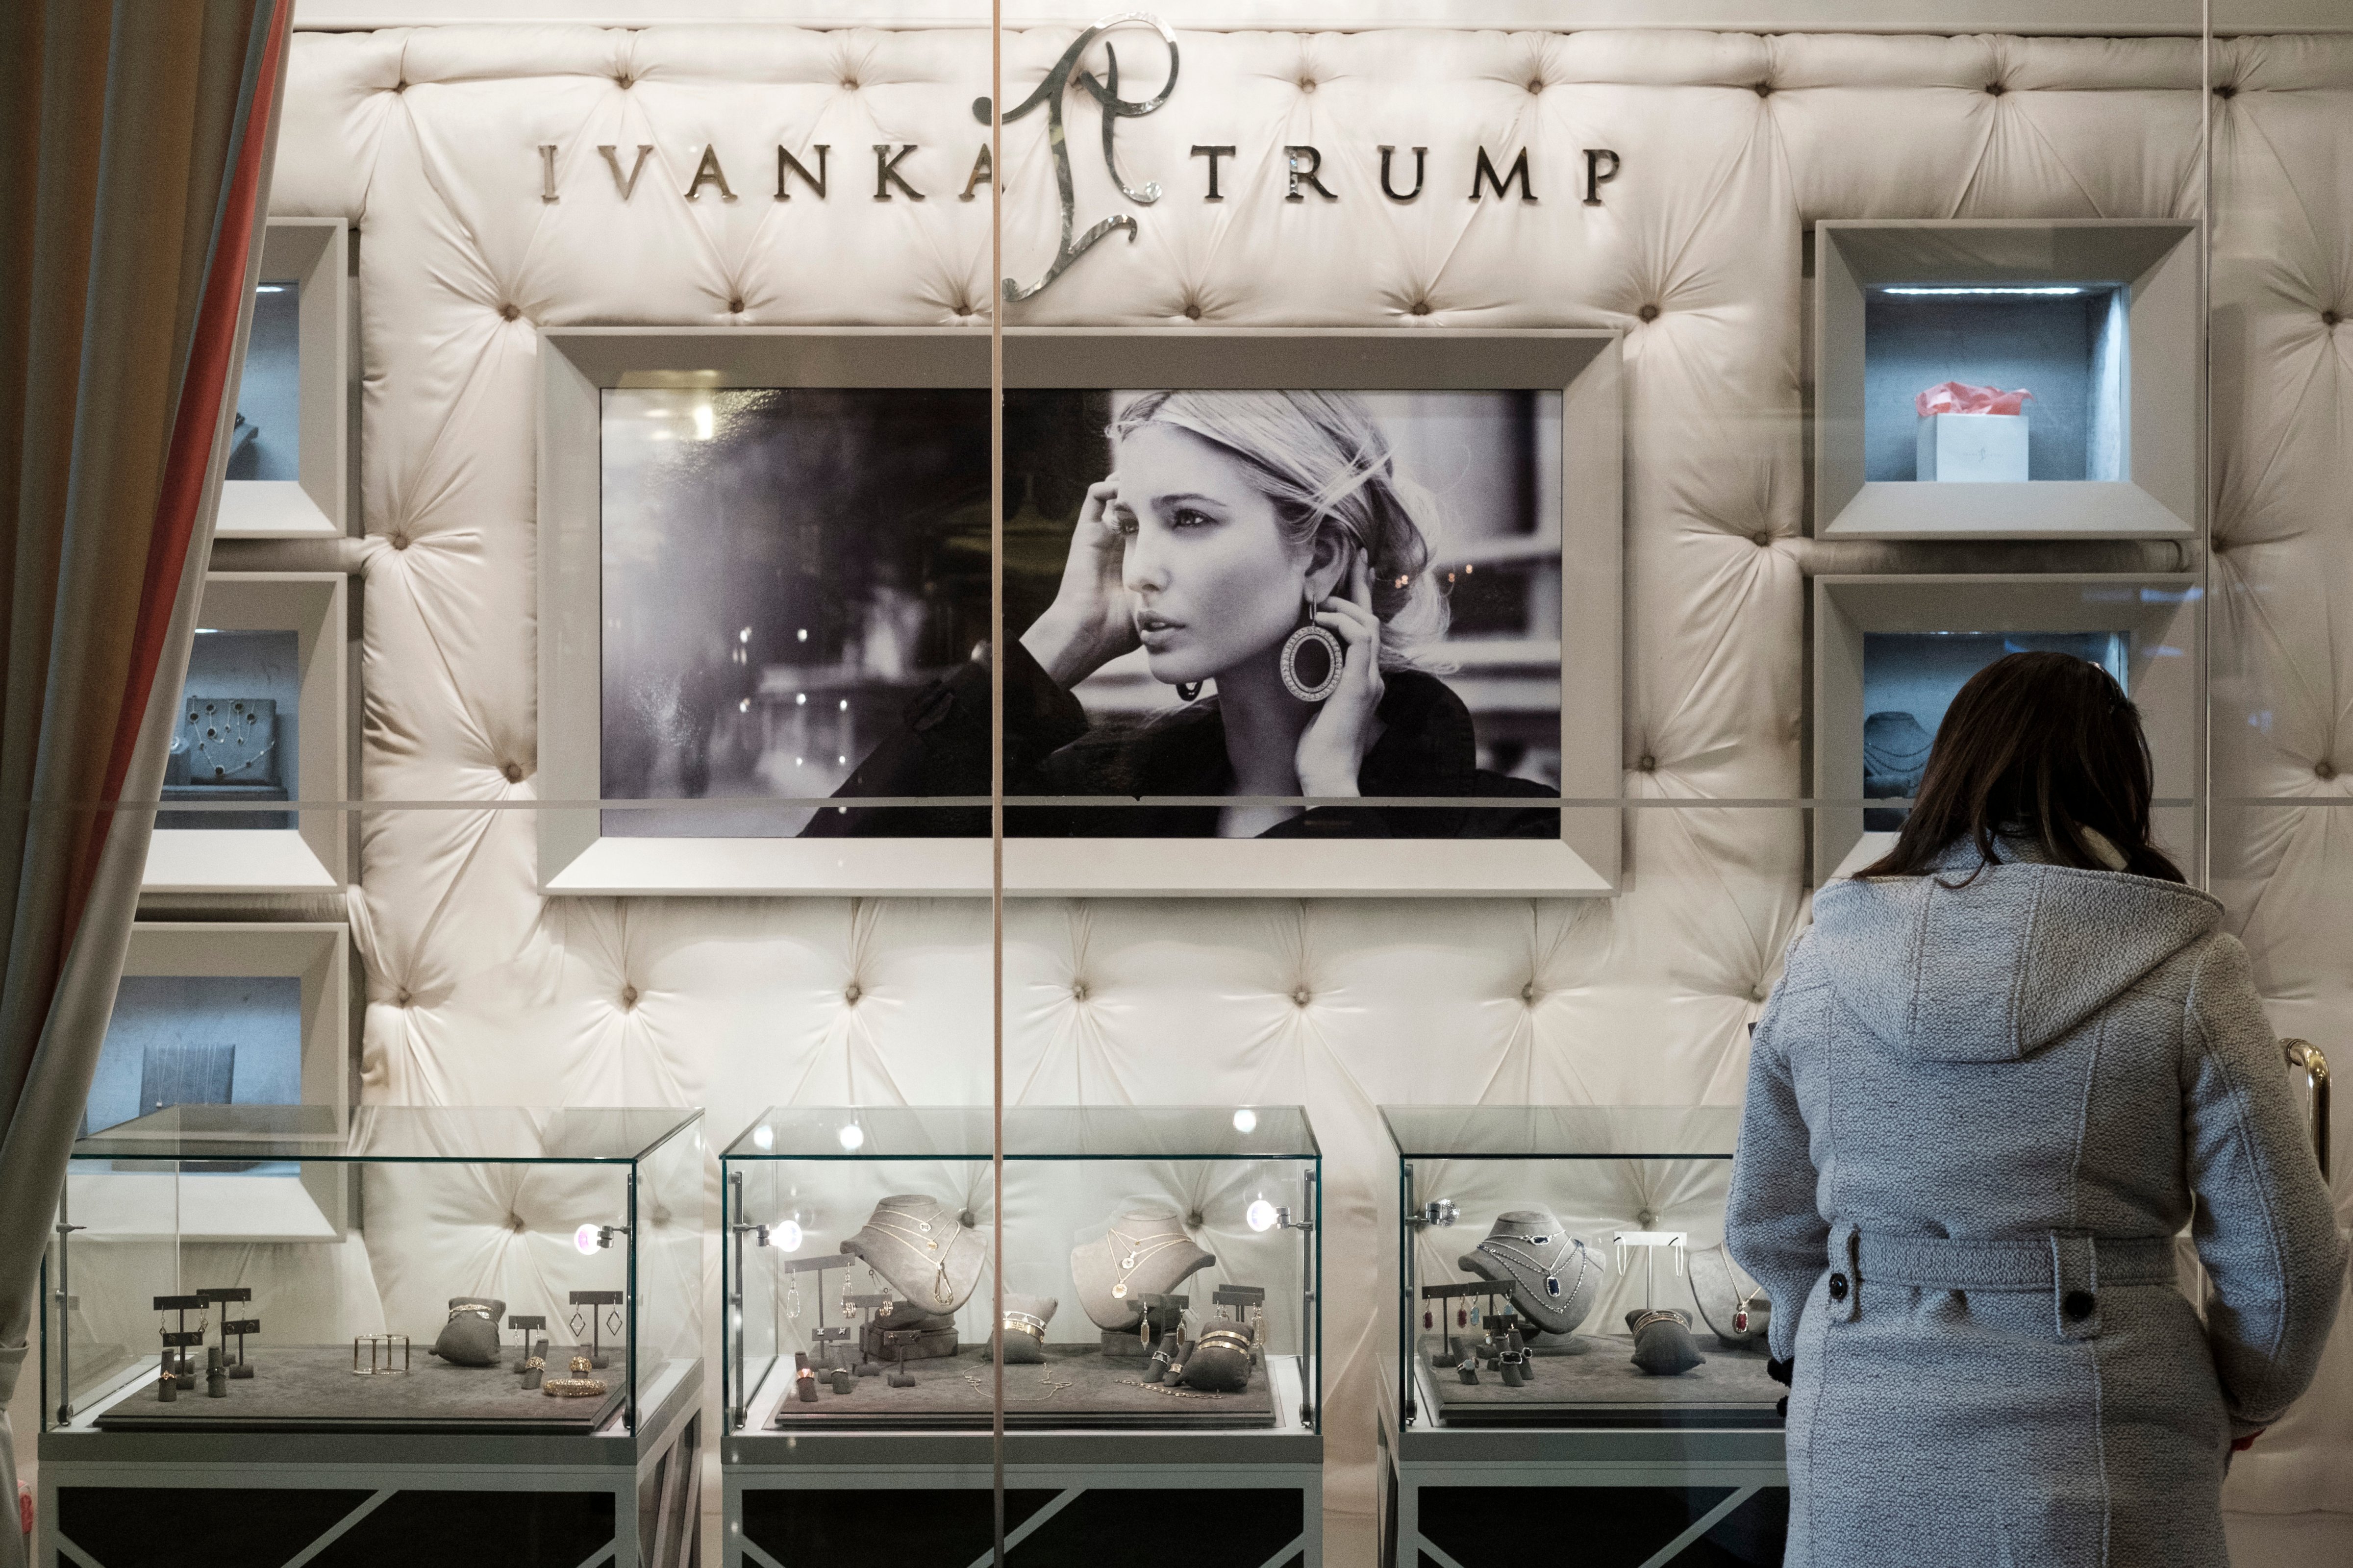 NEW YORK, NY - FEBRUARY 10: A woman browses jewelry for sale at the 'Ivanka Trump Collection' shop in the lobby at Trump Tower, February 10, 2017 in New York City. According to a market research firm Slice Intelligence, Ivanka Trump merchandise saw a 26 percent dip in sales in January 2017 compared to January 2016. Kellyanne Conway, a senior counselor to President Donald Trump, has been accused of ethics violations for promoting the Ivanka Trump fashion line during a television interview on Thursday. (Photo by Drew Angerer/Getty Images) (Drew Angerer&mdash;Getty Images)